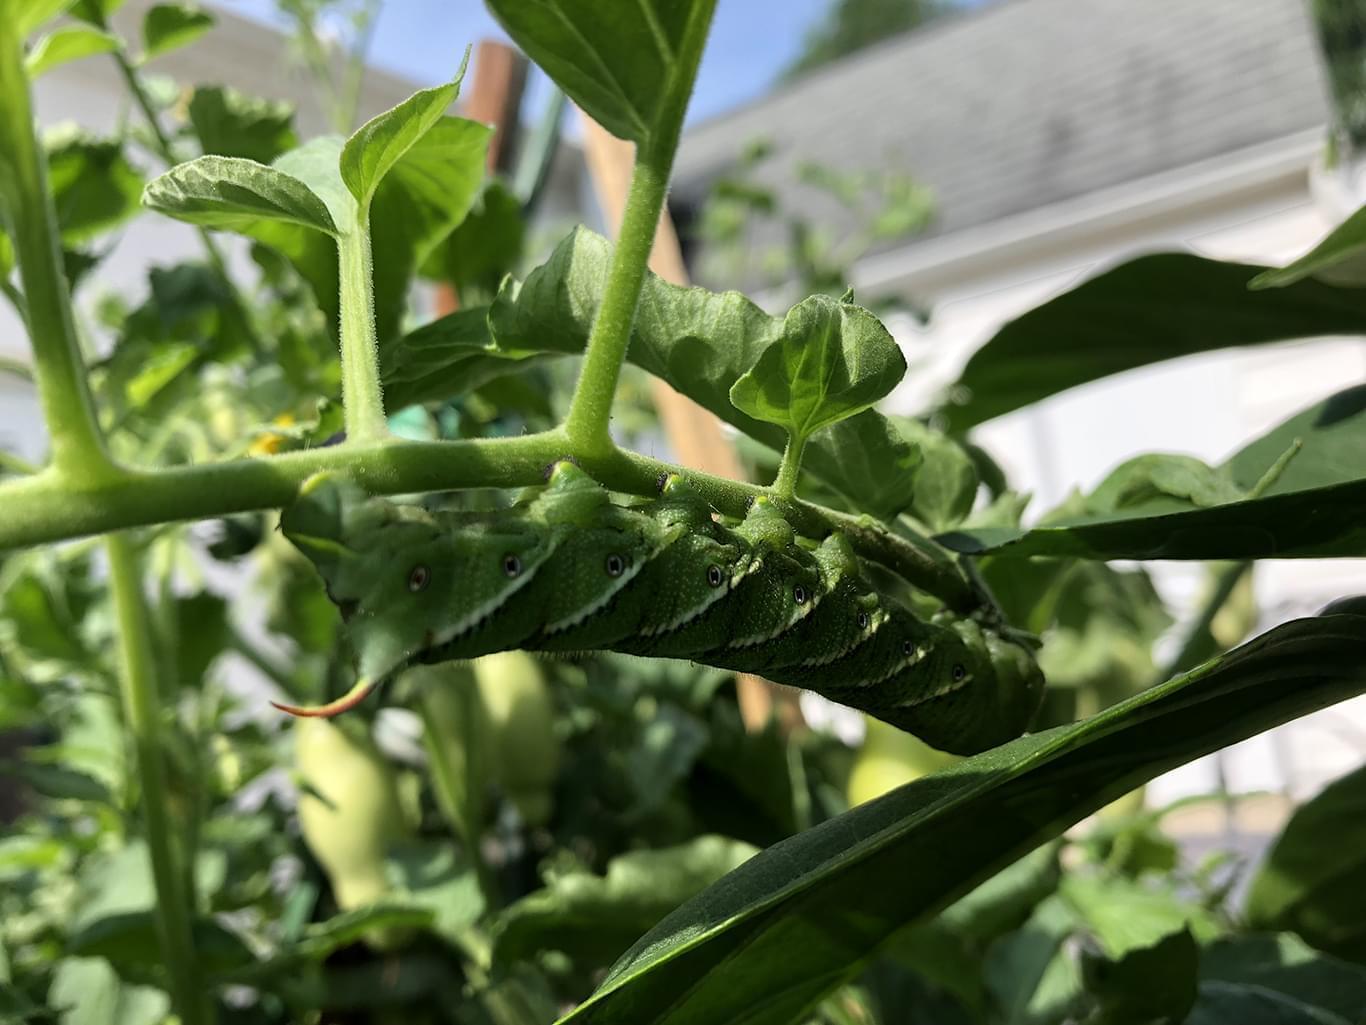 hornworm on a plant